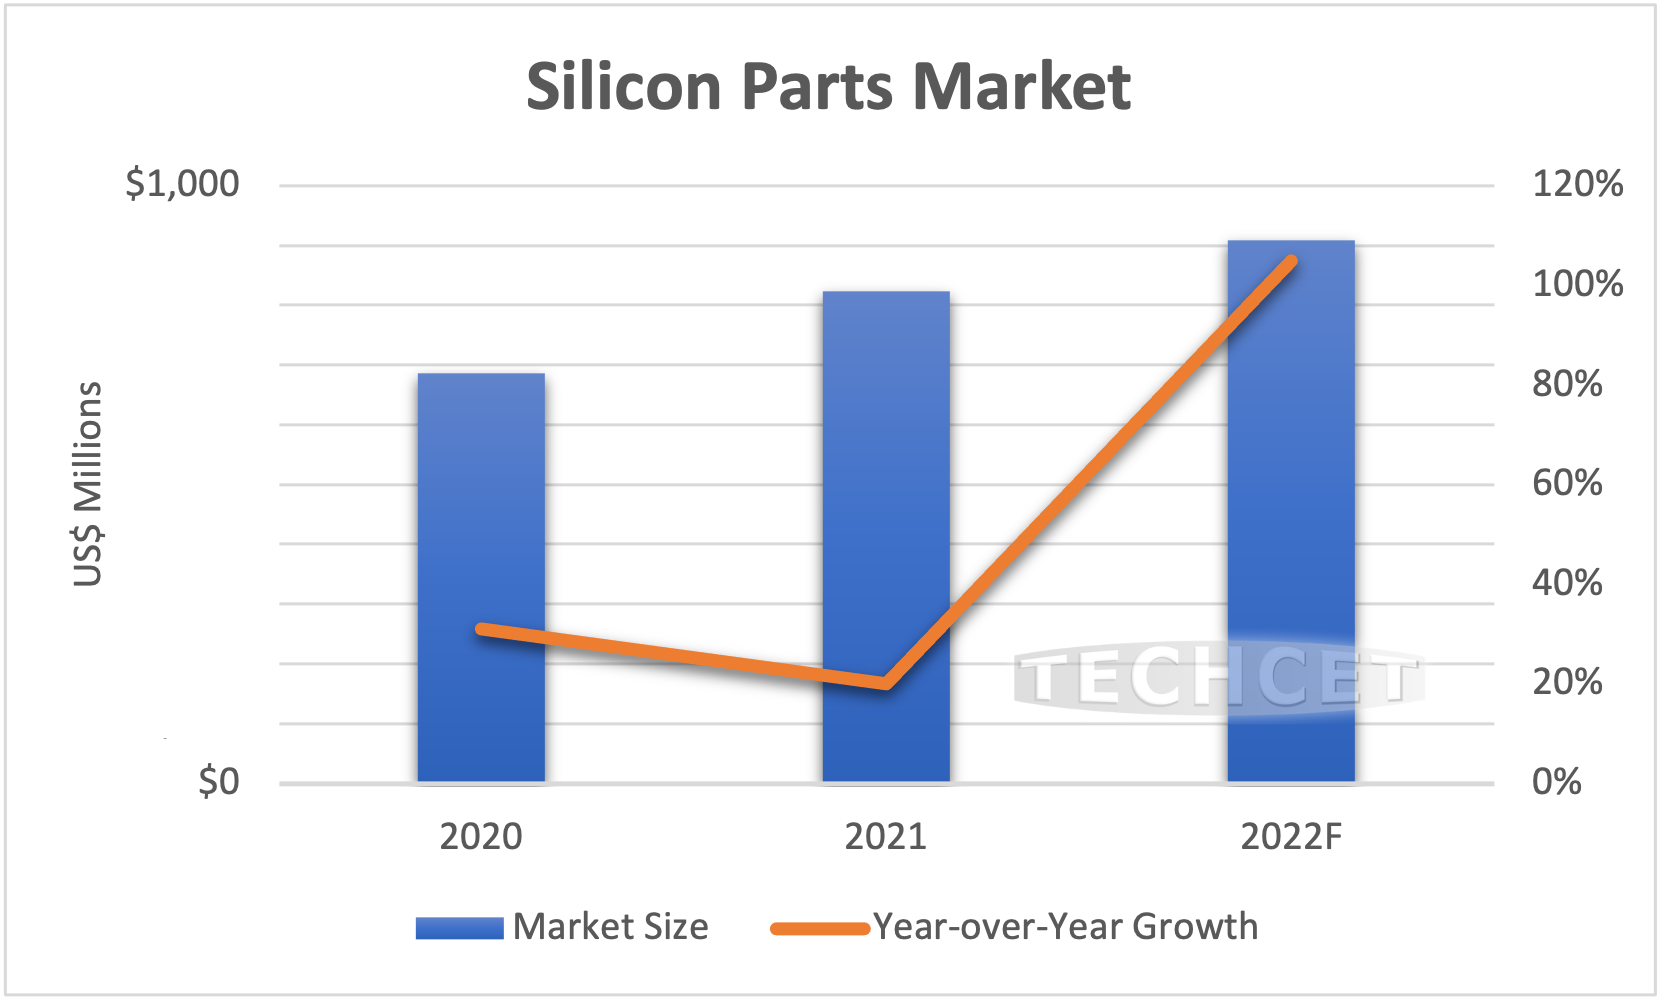 Semiconductor Equipment Consumables – Silicon Parts, in High Demand with Continued Shift Toward Asia - Techcet